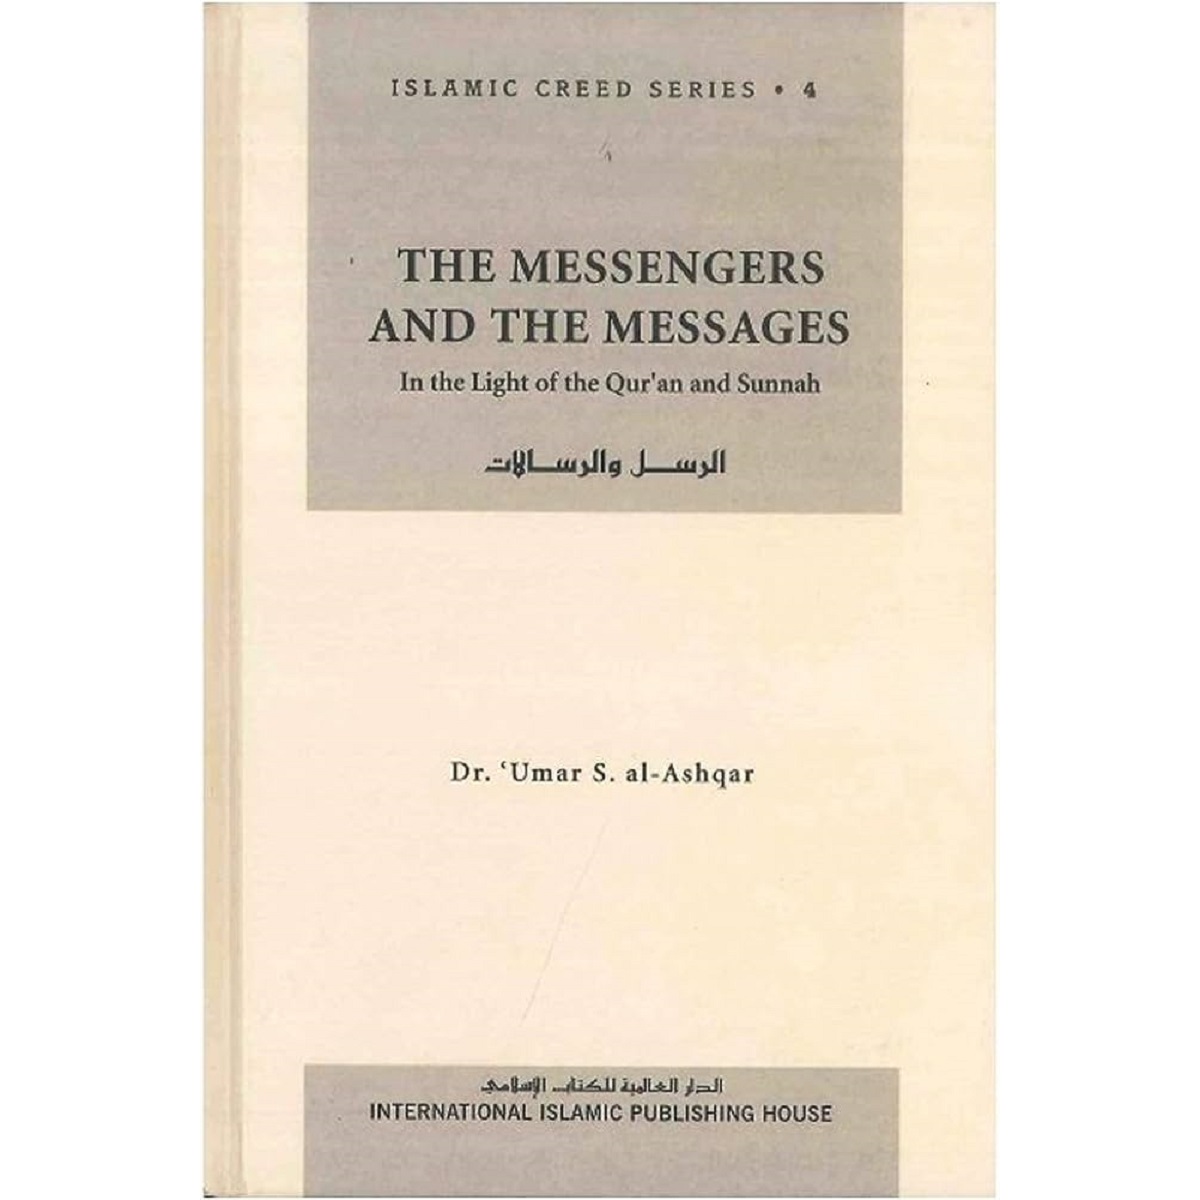 https://tarbiyahbooksplus.com/shop/hadith-and-sunnah/the-messengers-and-the-messages/